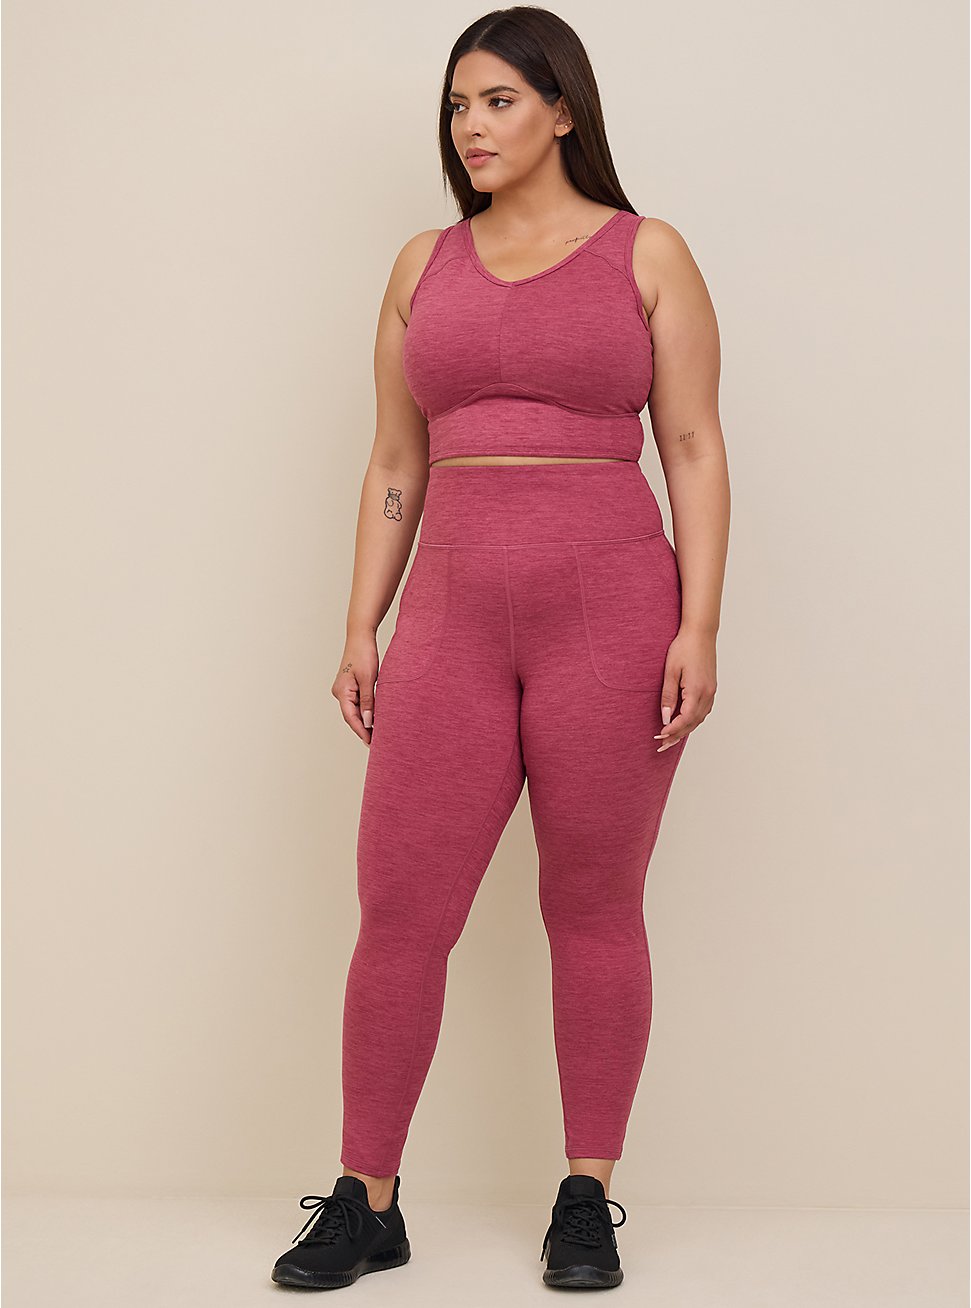 Super Soft Performance Jersey Full Length Active Legging With Patch Pocket, DUSTY ROSE, hi-res